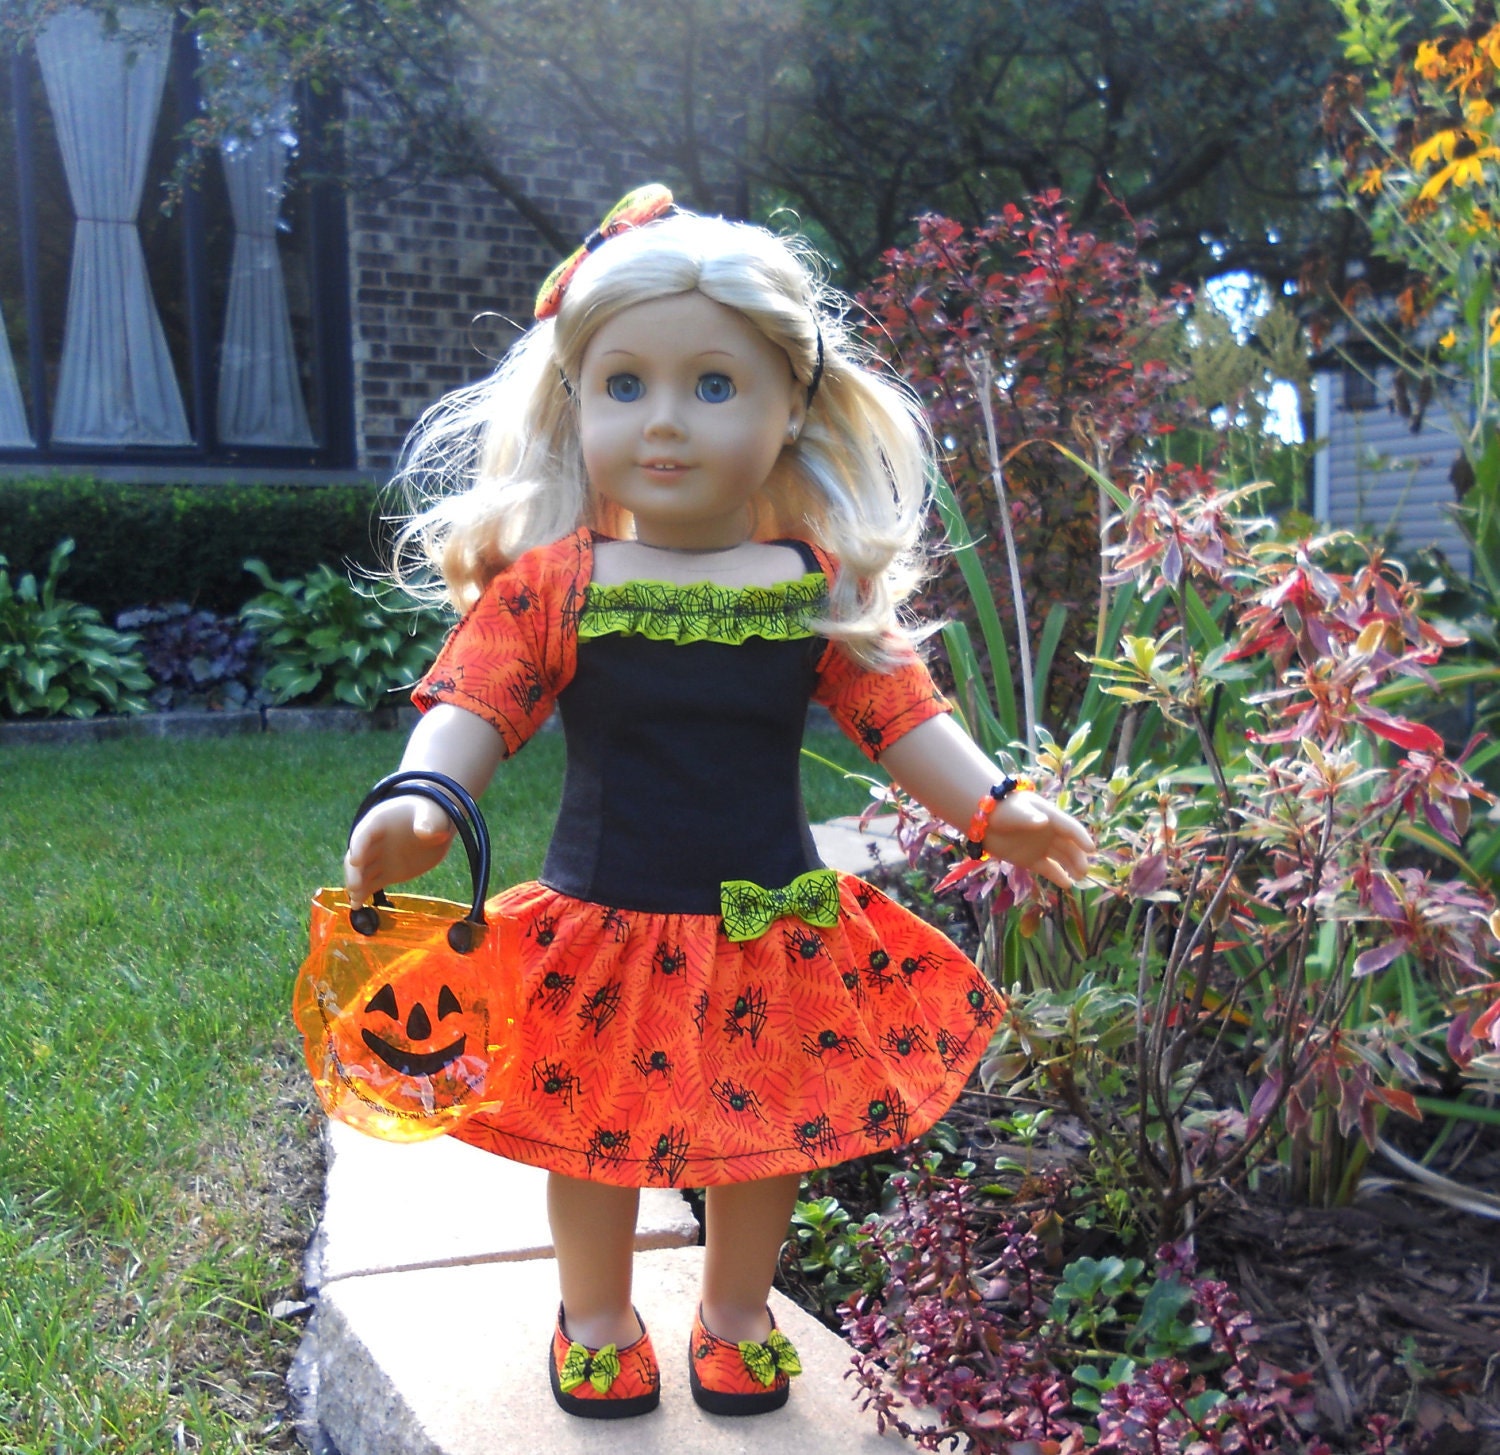 American Girl Clothes - Halloween Dress - Orange Black Spiders - including Shoes - fits 18" Dolls